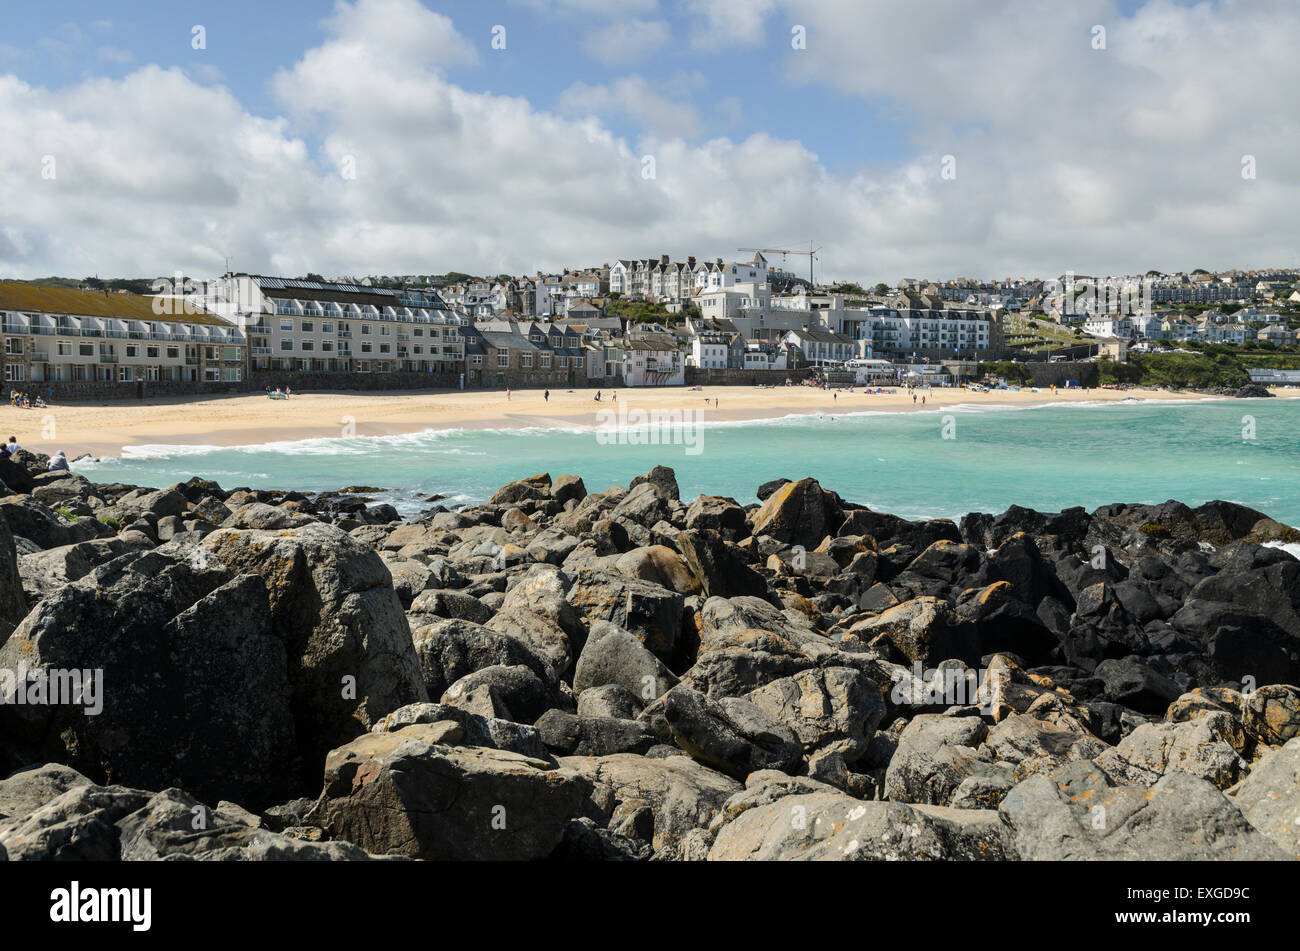 Porthmeor Beach, Cornwall,England, UK hosts holiday apartments, artists studios, cafes and The Tate Gallery. Stock Photo